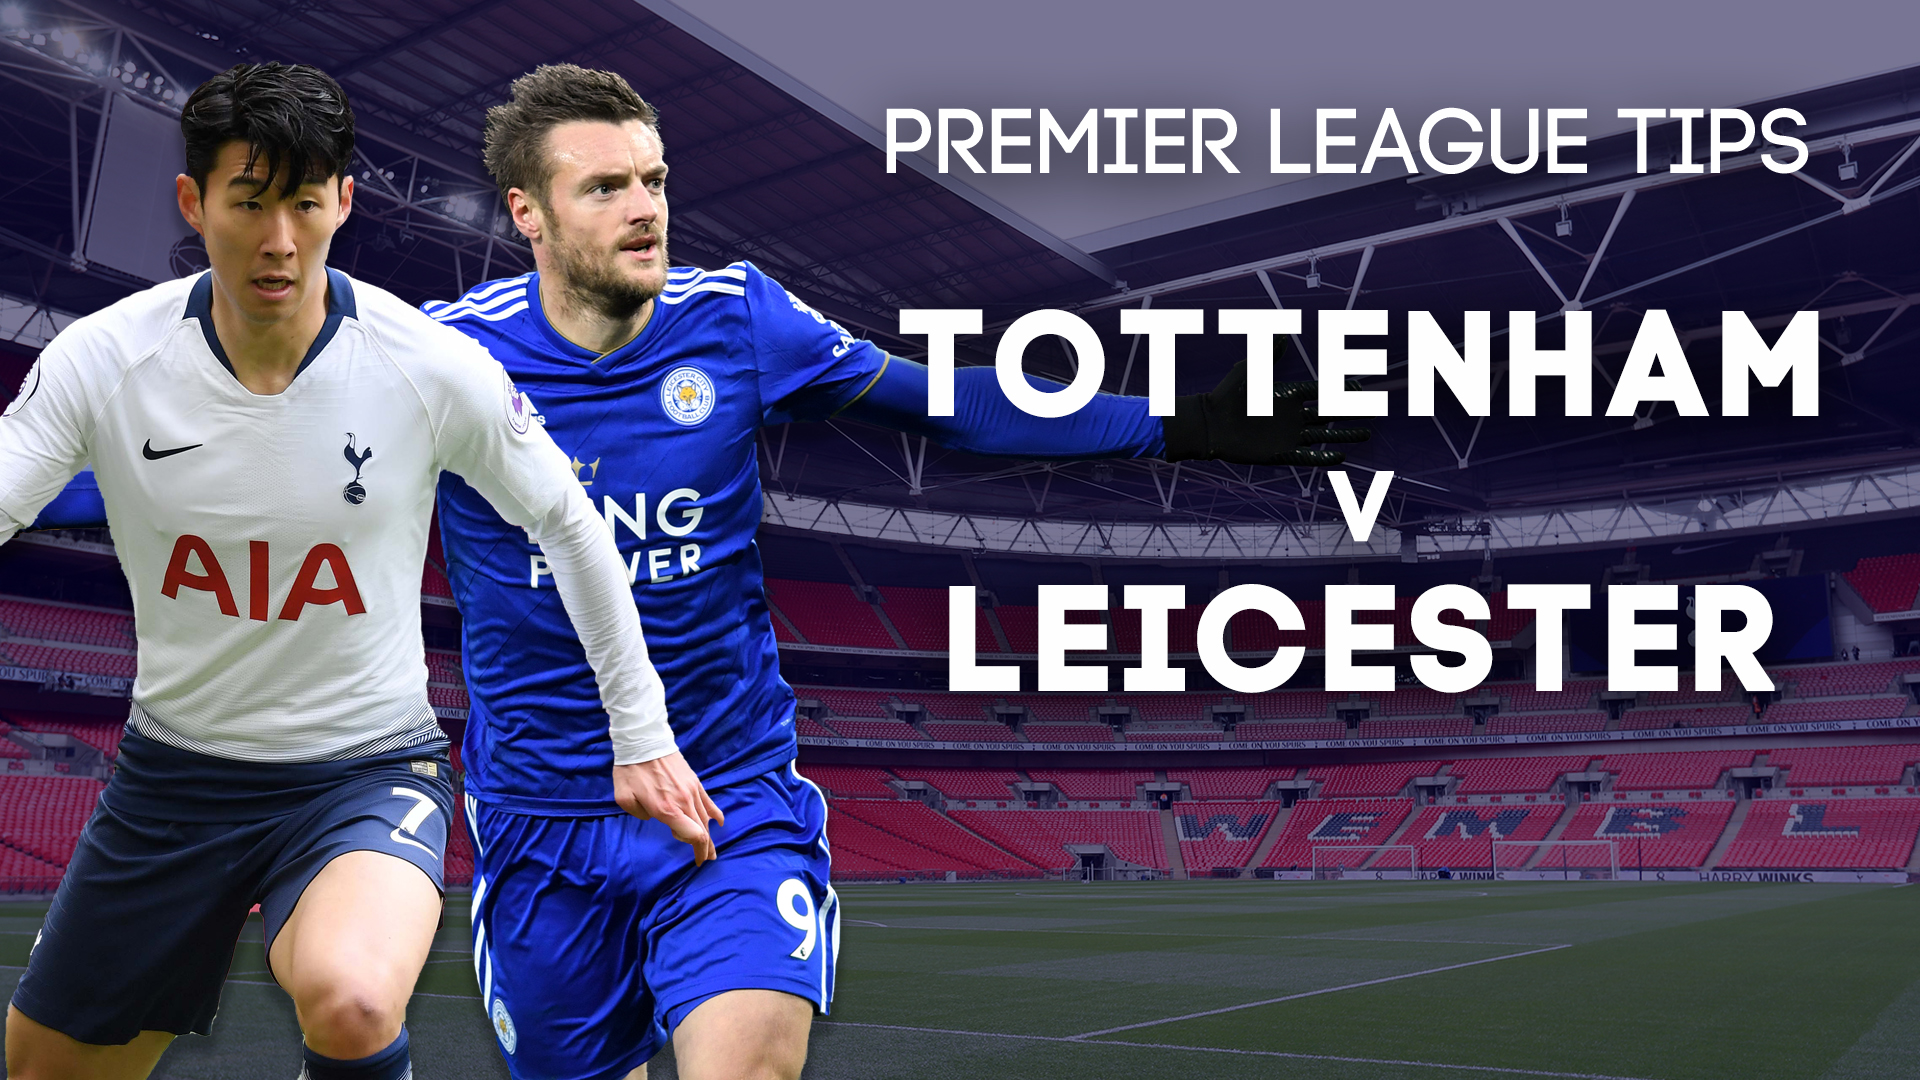 Tottenham Hotspur v Leicester City preview: Prediction, free Premier League tips, best bets and RequestABet options for game at Wembley